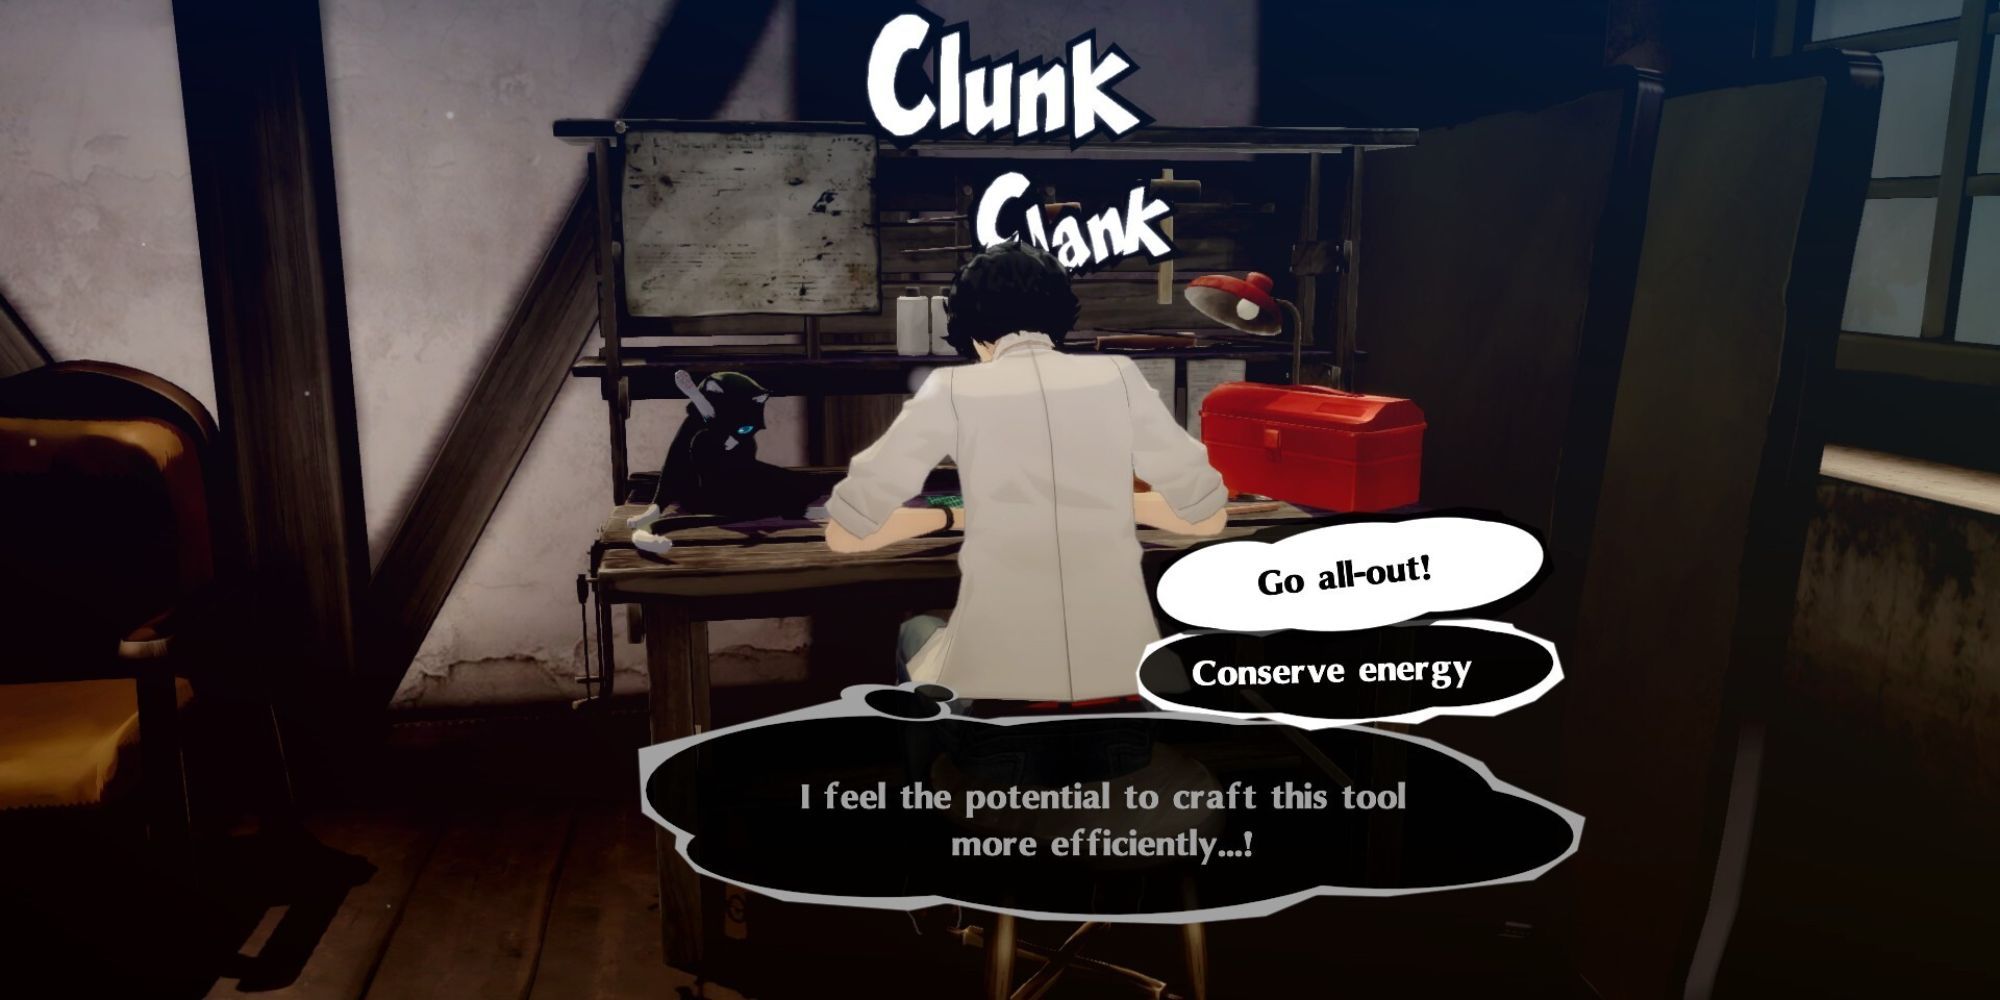 Persona 5 Royal - Modded screenshot shows Joker crafting infiltration tools in his bedroom